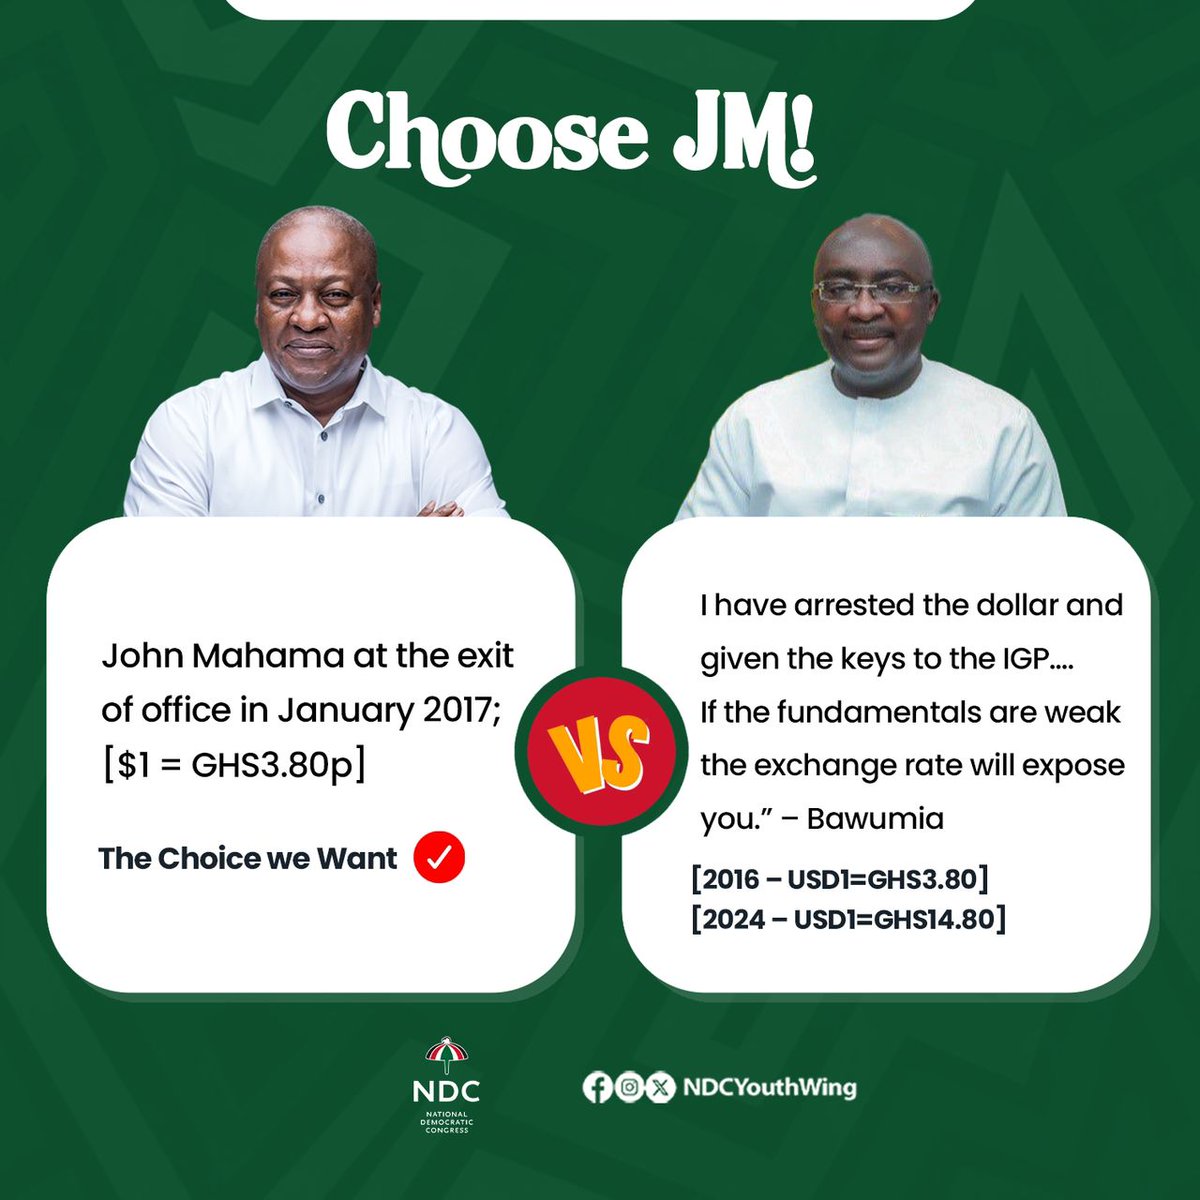 The continues depreciation of the cedis is enough not to take Bawumia serious. Vote wisely !
 ChooseJM #ChangeIsComing